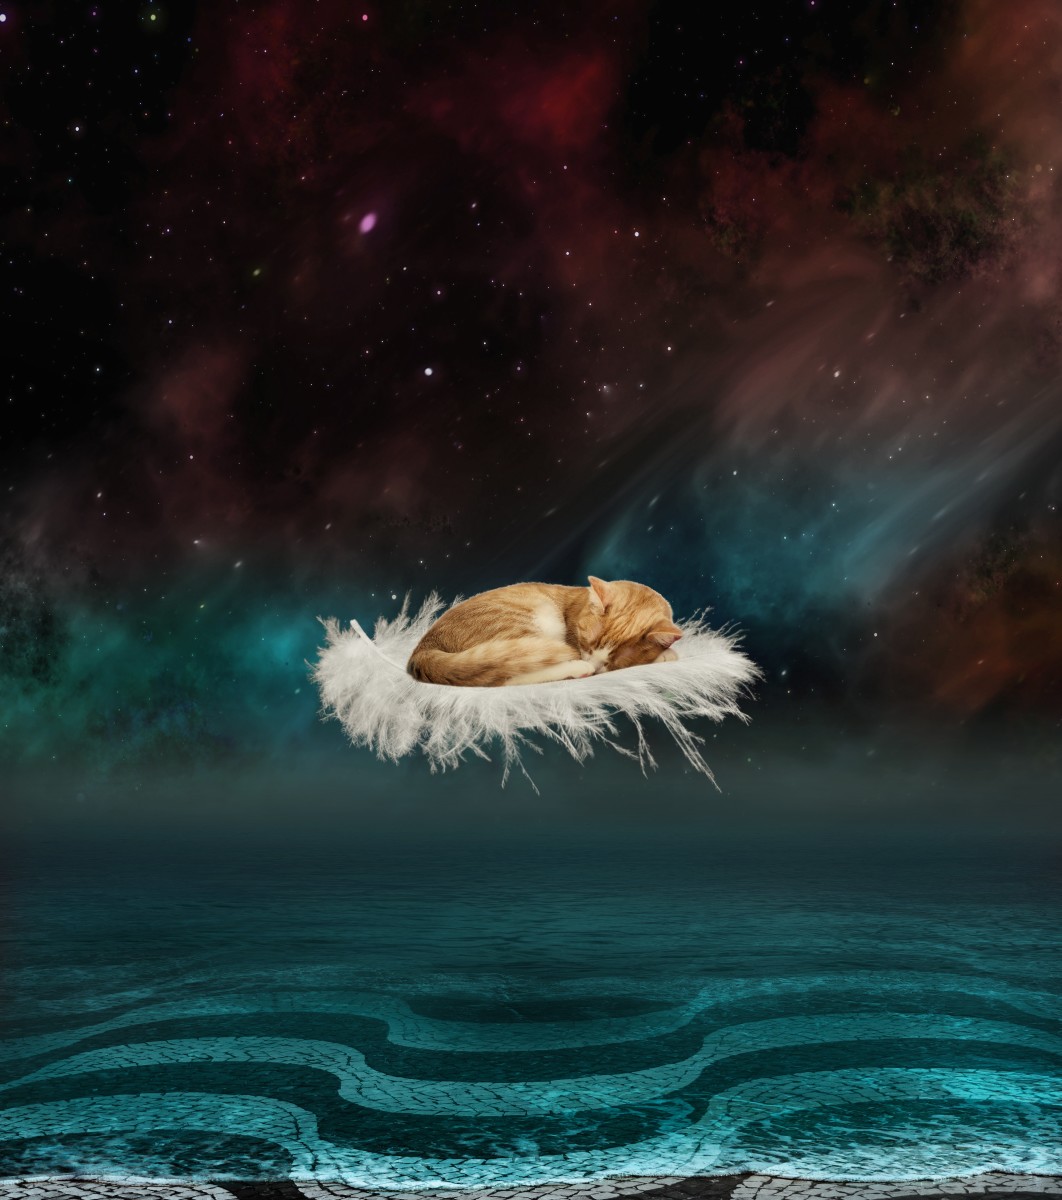 cats-in-a-dream-the-meaning-of-cats-as-dream-symbols